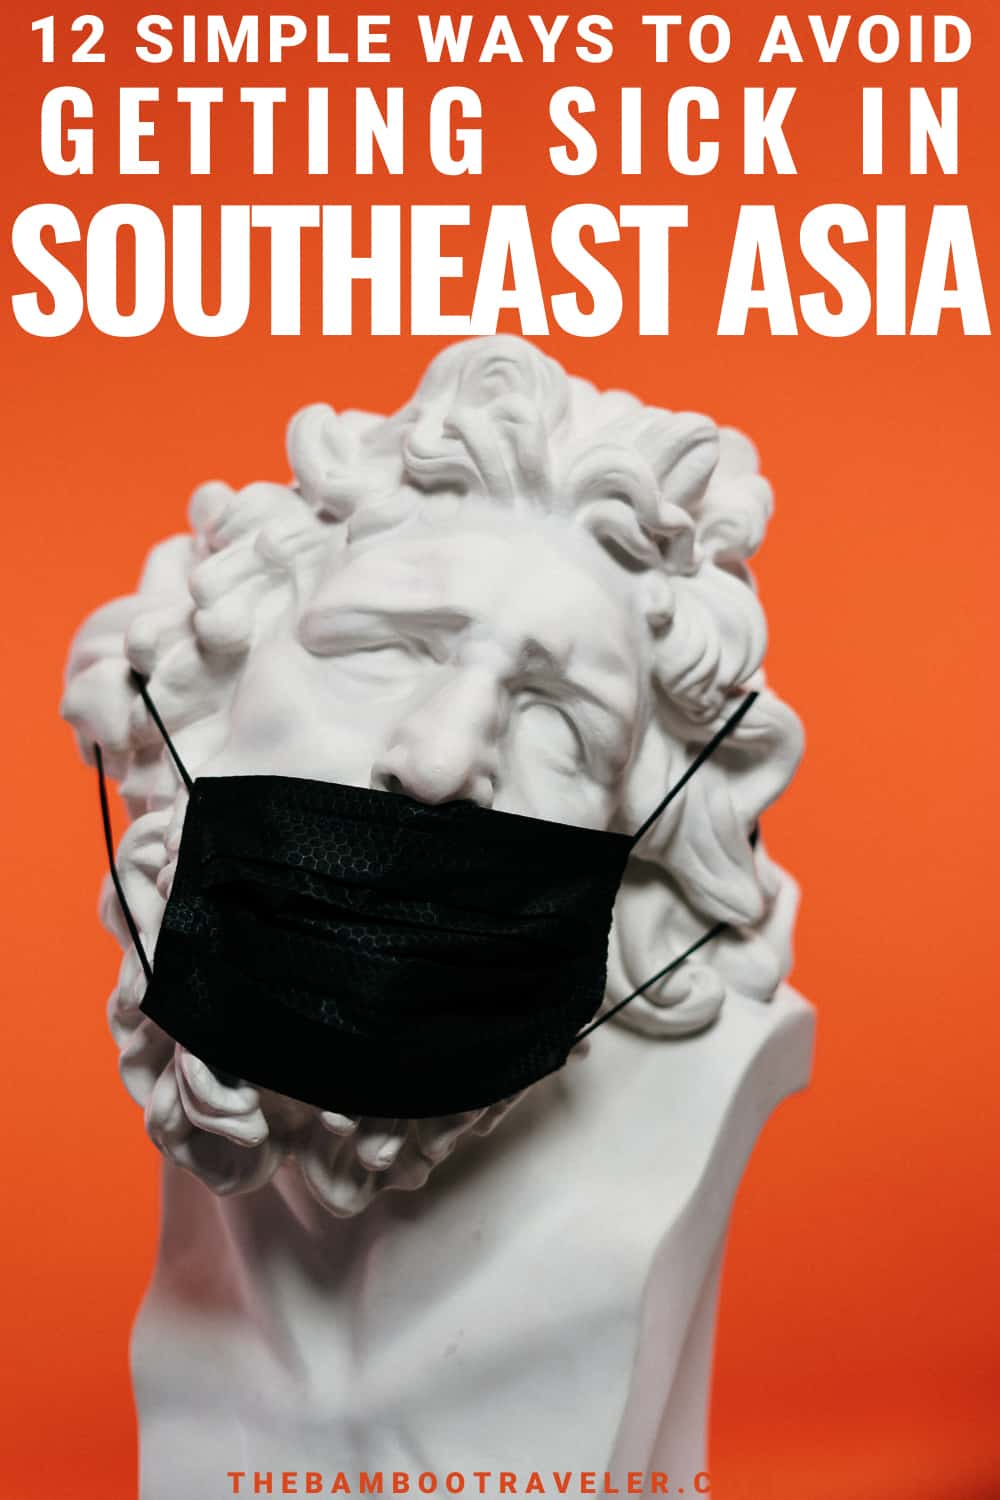 12 Simple Ways to avoid getting sick in Southeast Asia - a photo of a statue with a face mask on it